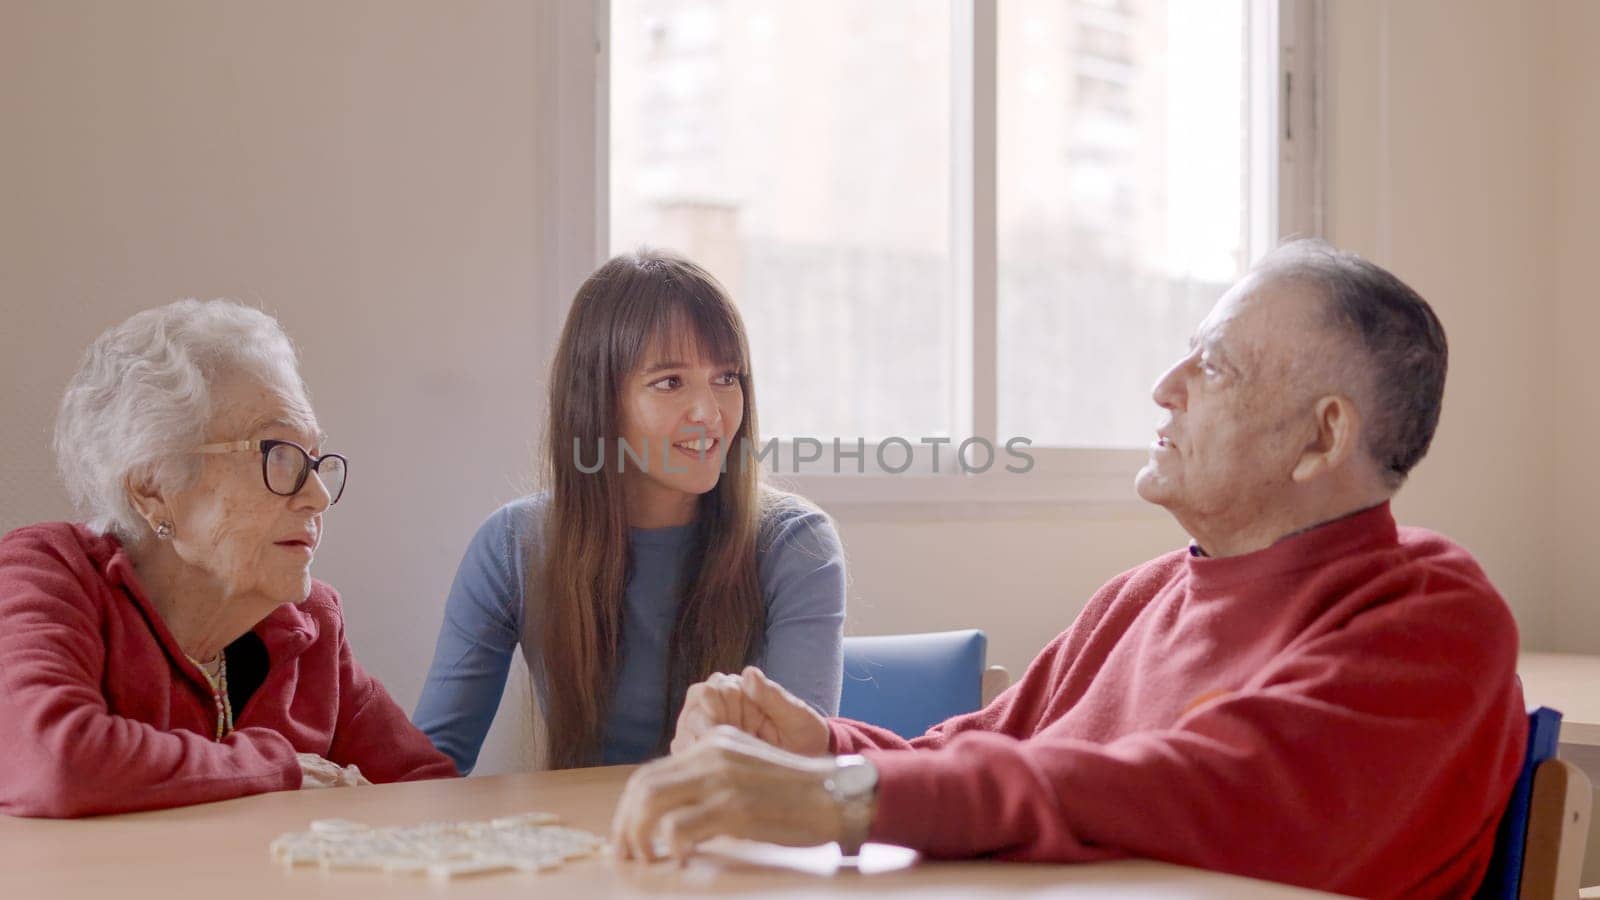 A grandfather talking with the family during a visit in a geriatric